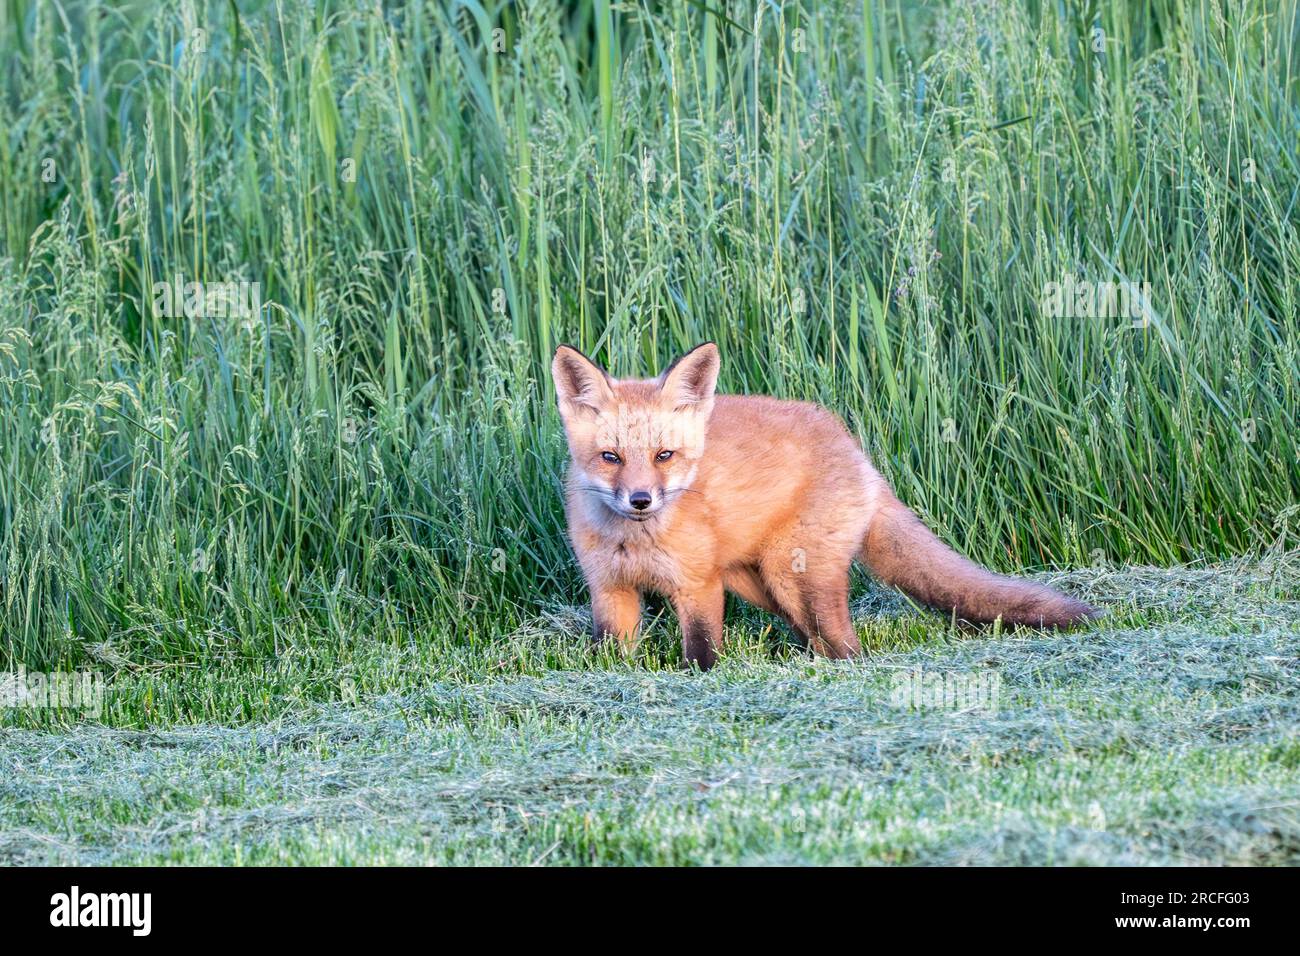 Curious Red Fox (Vulpes vulpes) kit pop out of tall grass and look at camera. Stock Photo